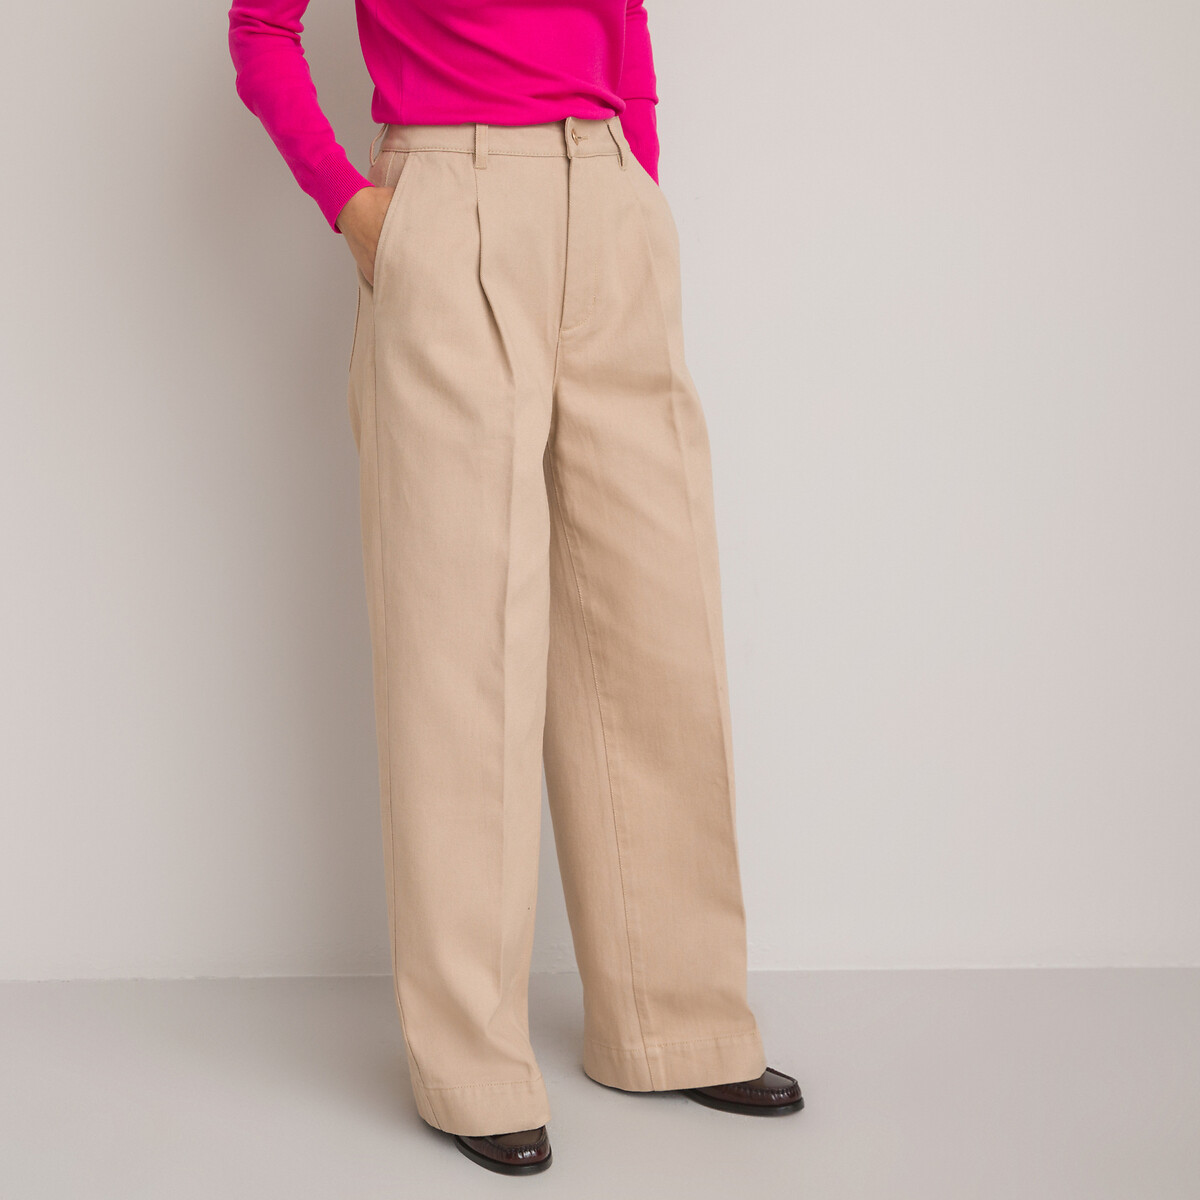 Summer Style To Try Loose Fitting Trousers for Ladies  INNERMOD